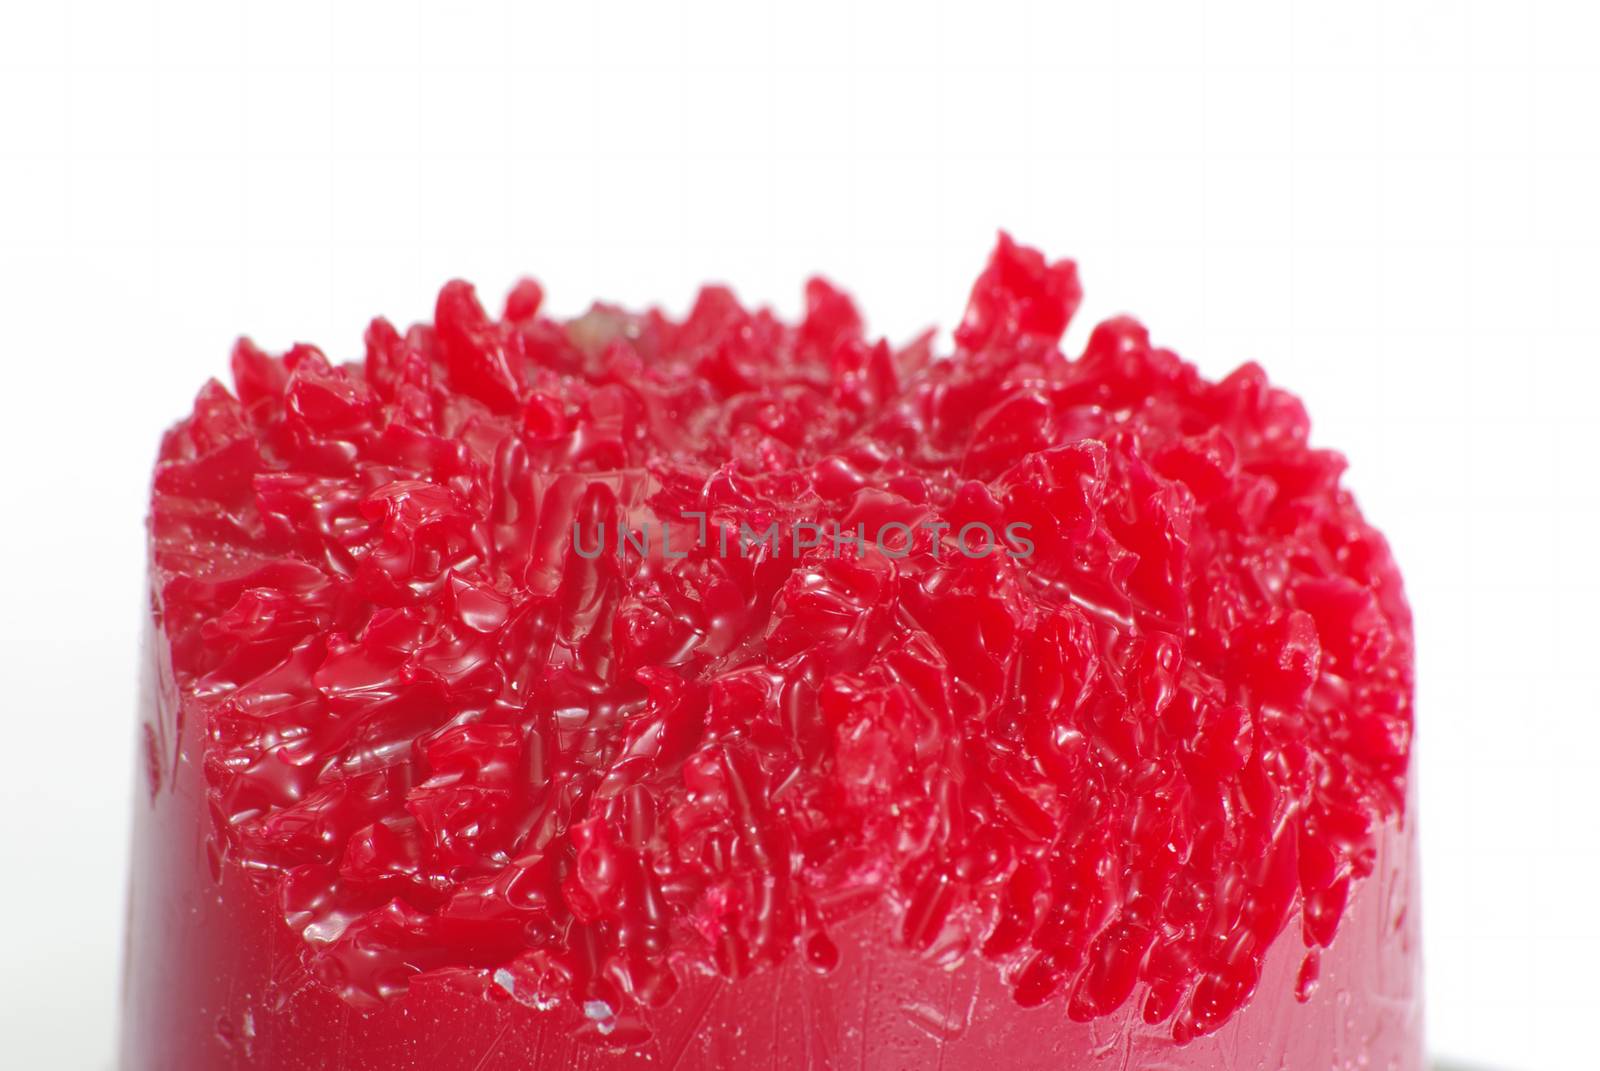 Close image of red wax used in dentistry laborator